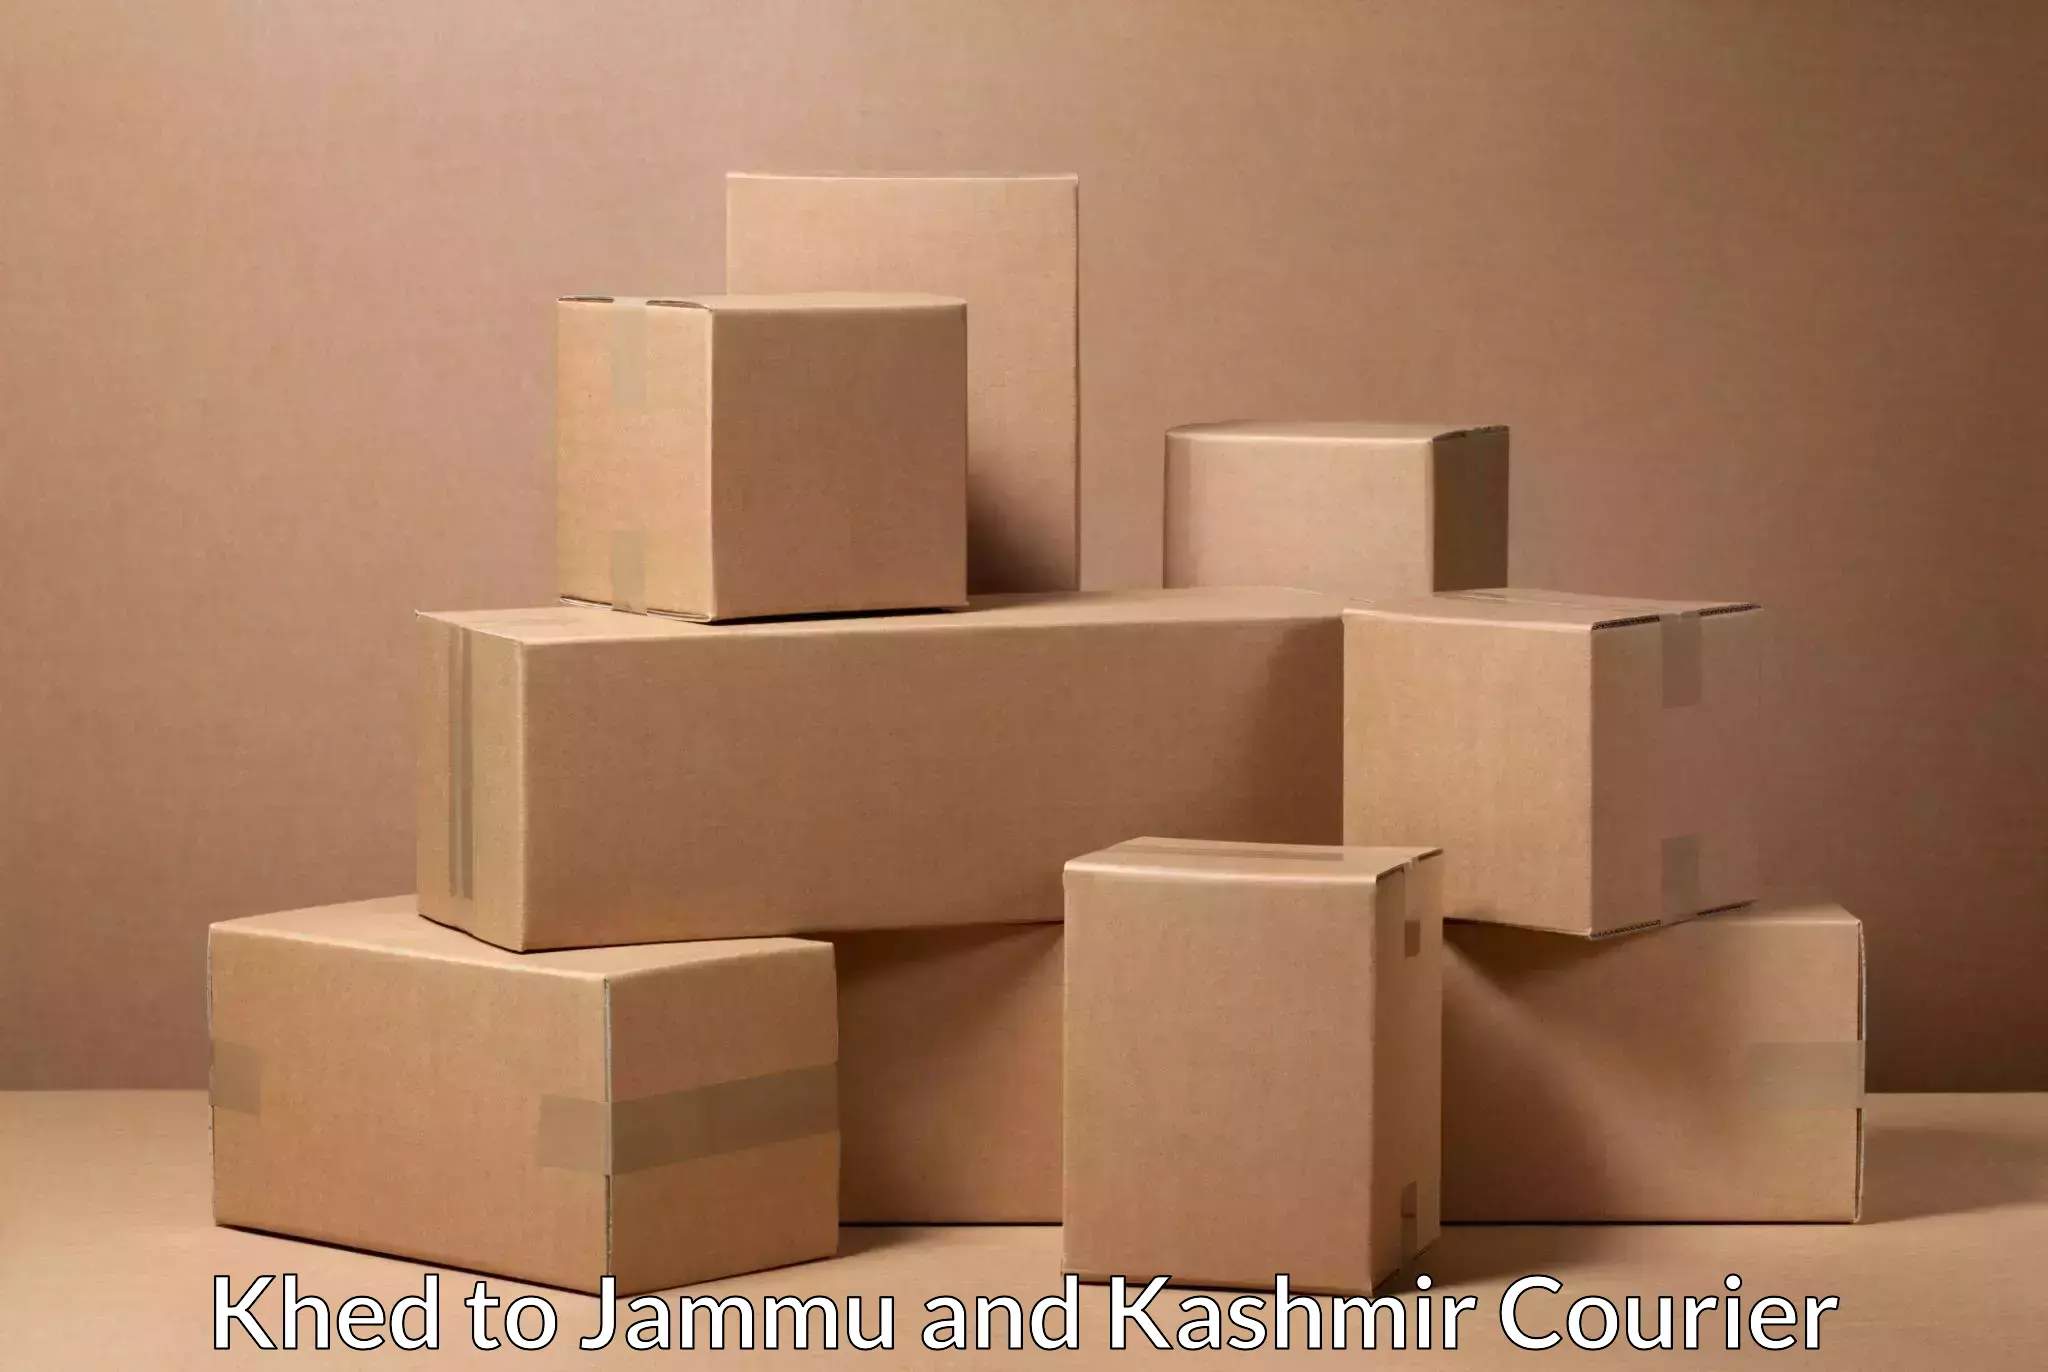 International shipping in Khed to Baramulla